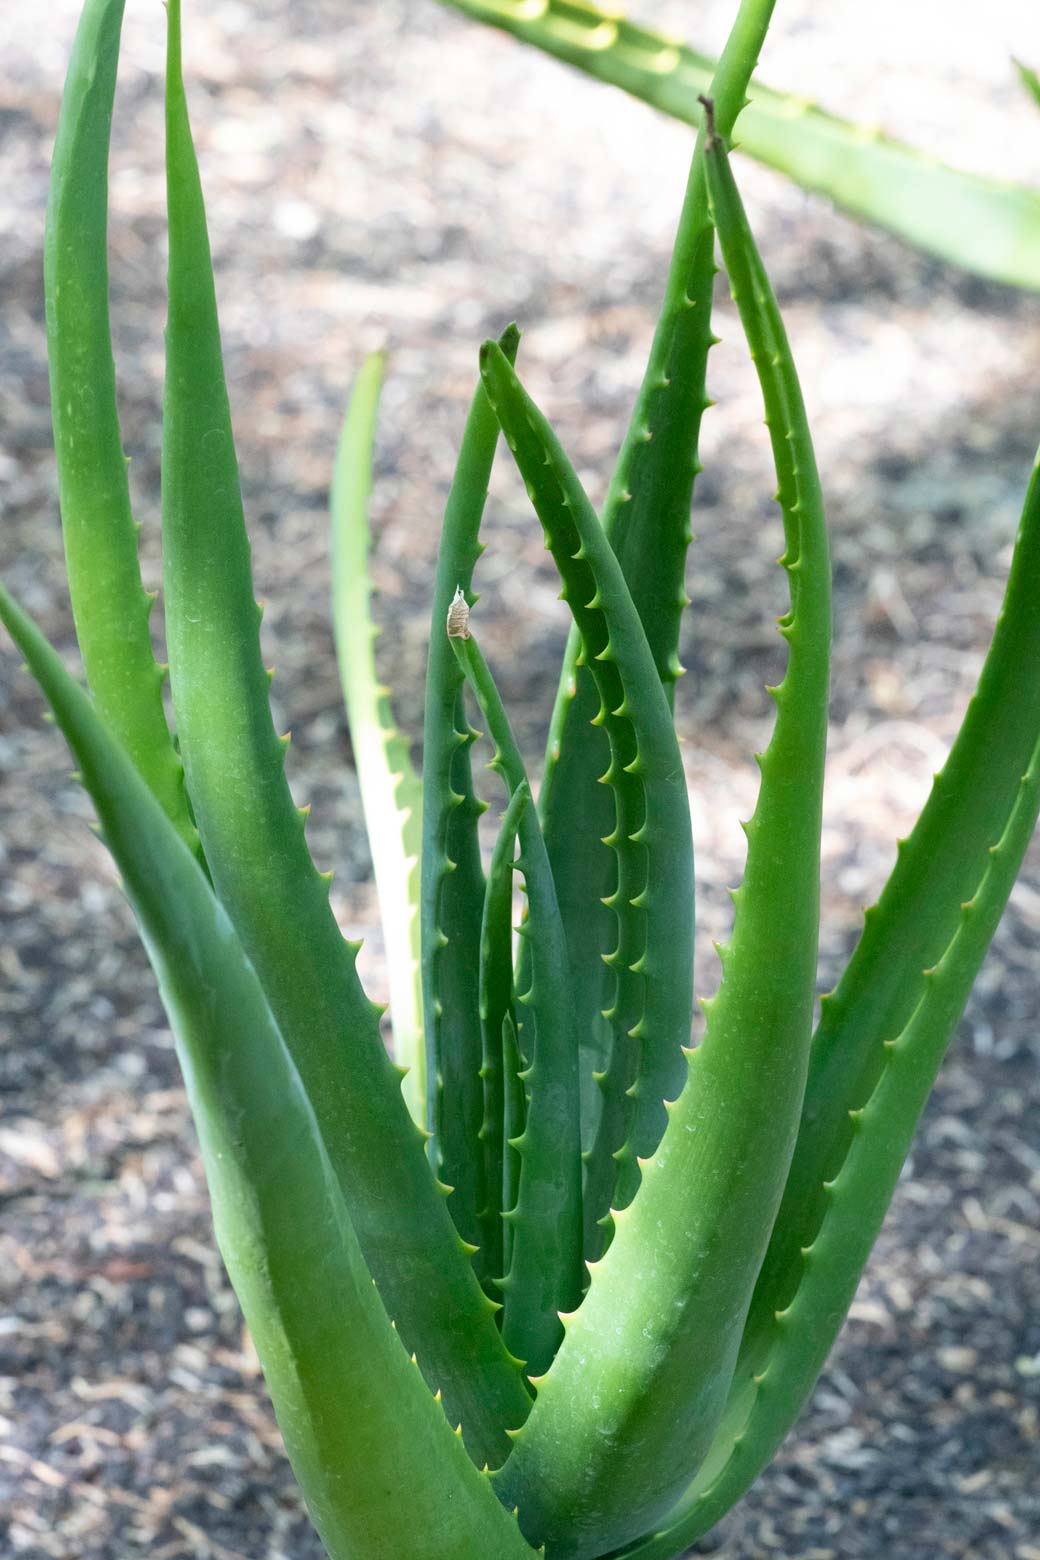 A close-up of the leaves of Nubian Aloe.